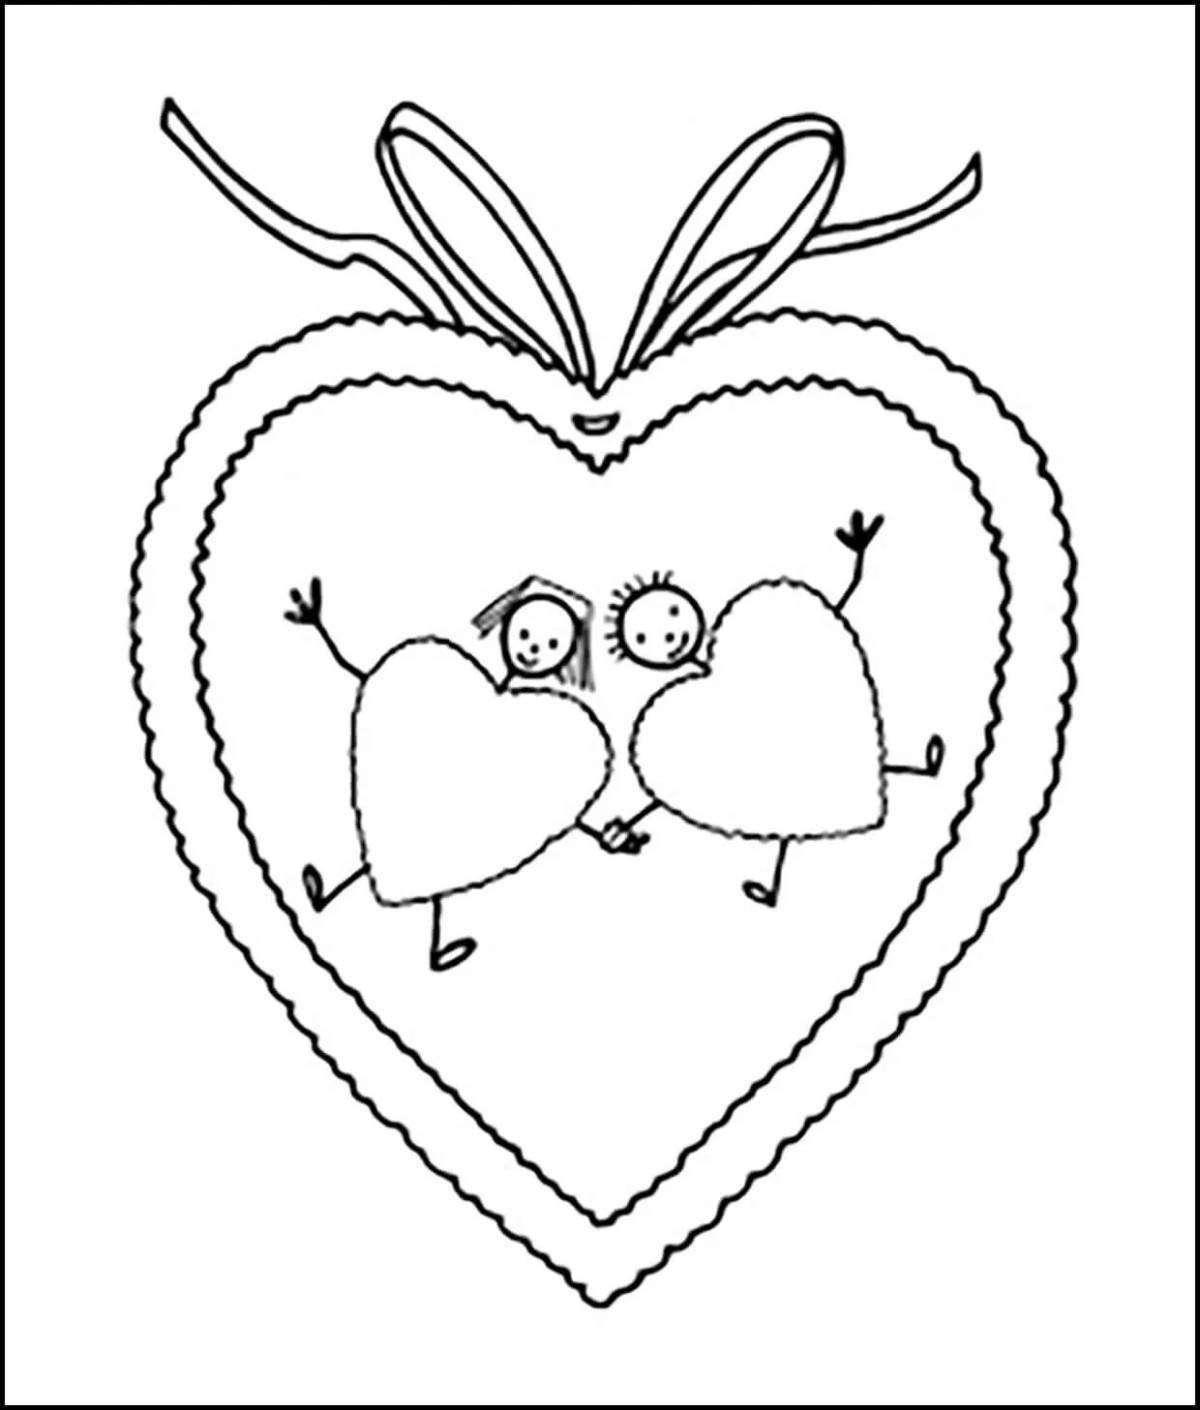 Great valentine's day coloring book for kids